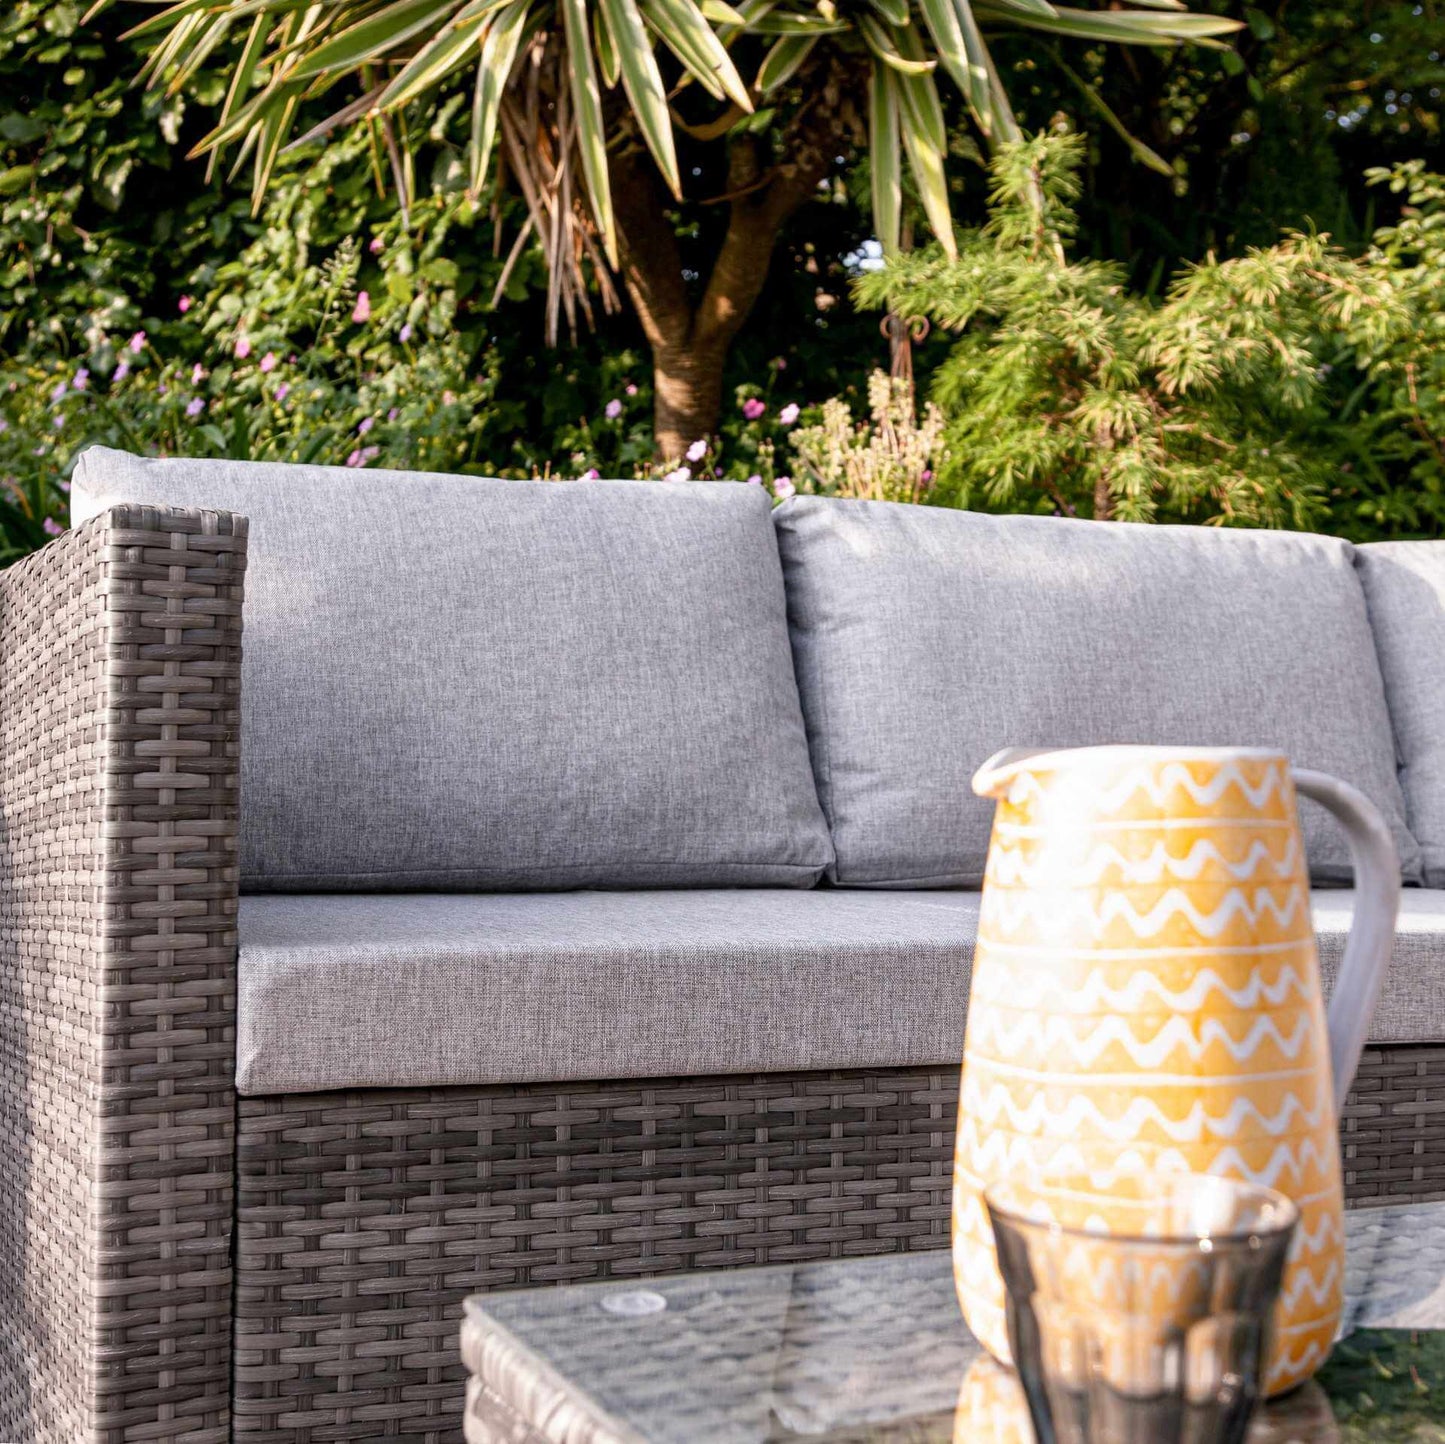 4 Seater Rattan Corner Sofa Set with Lean Over Parasol and Base - Grey Weave - Laura James